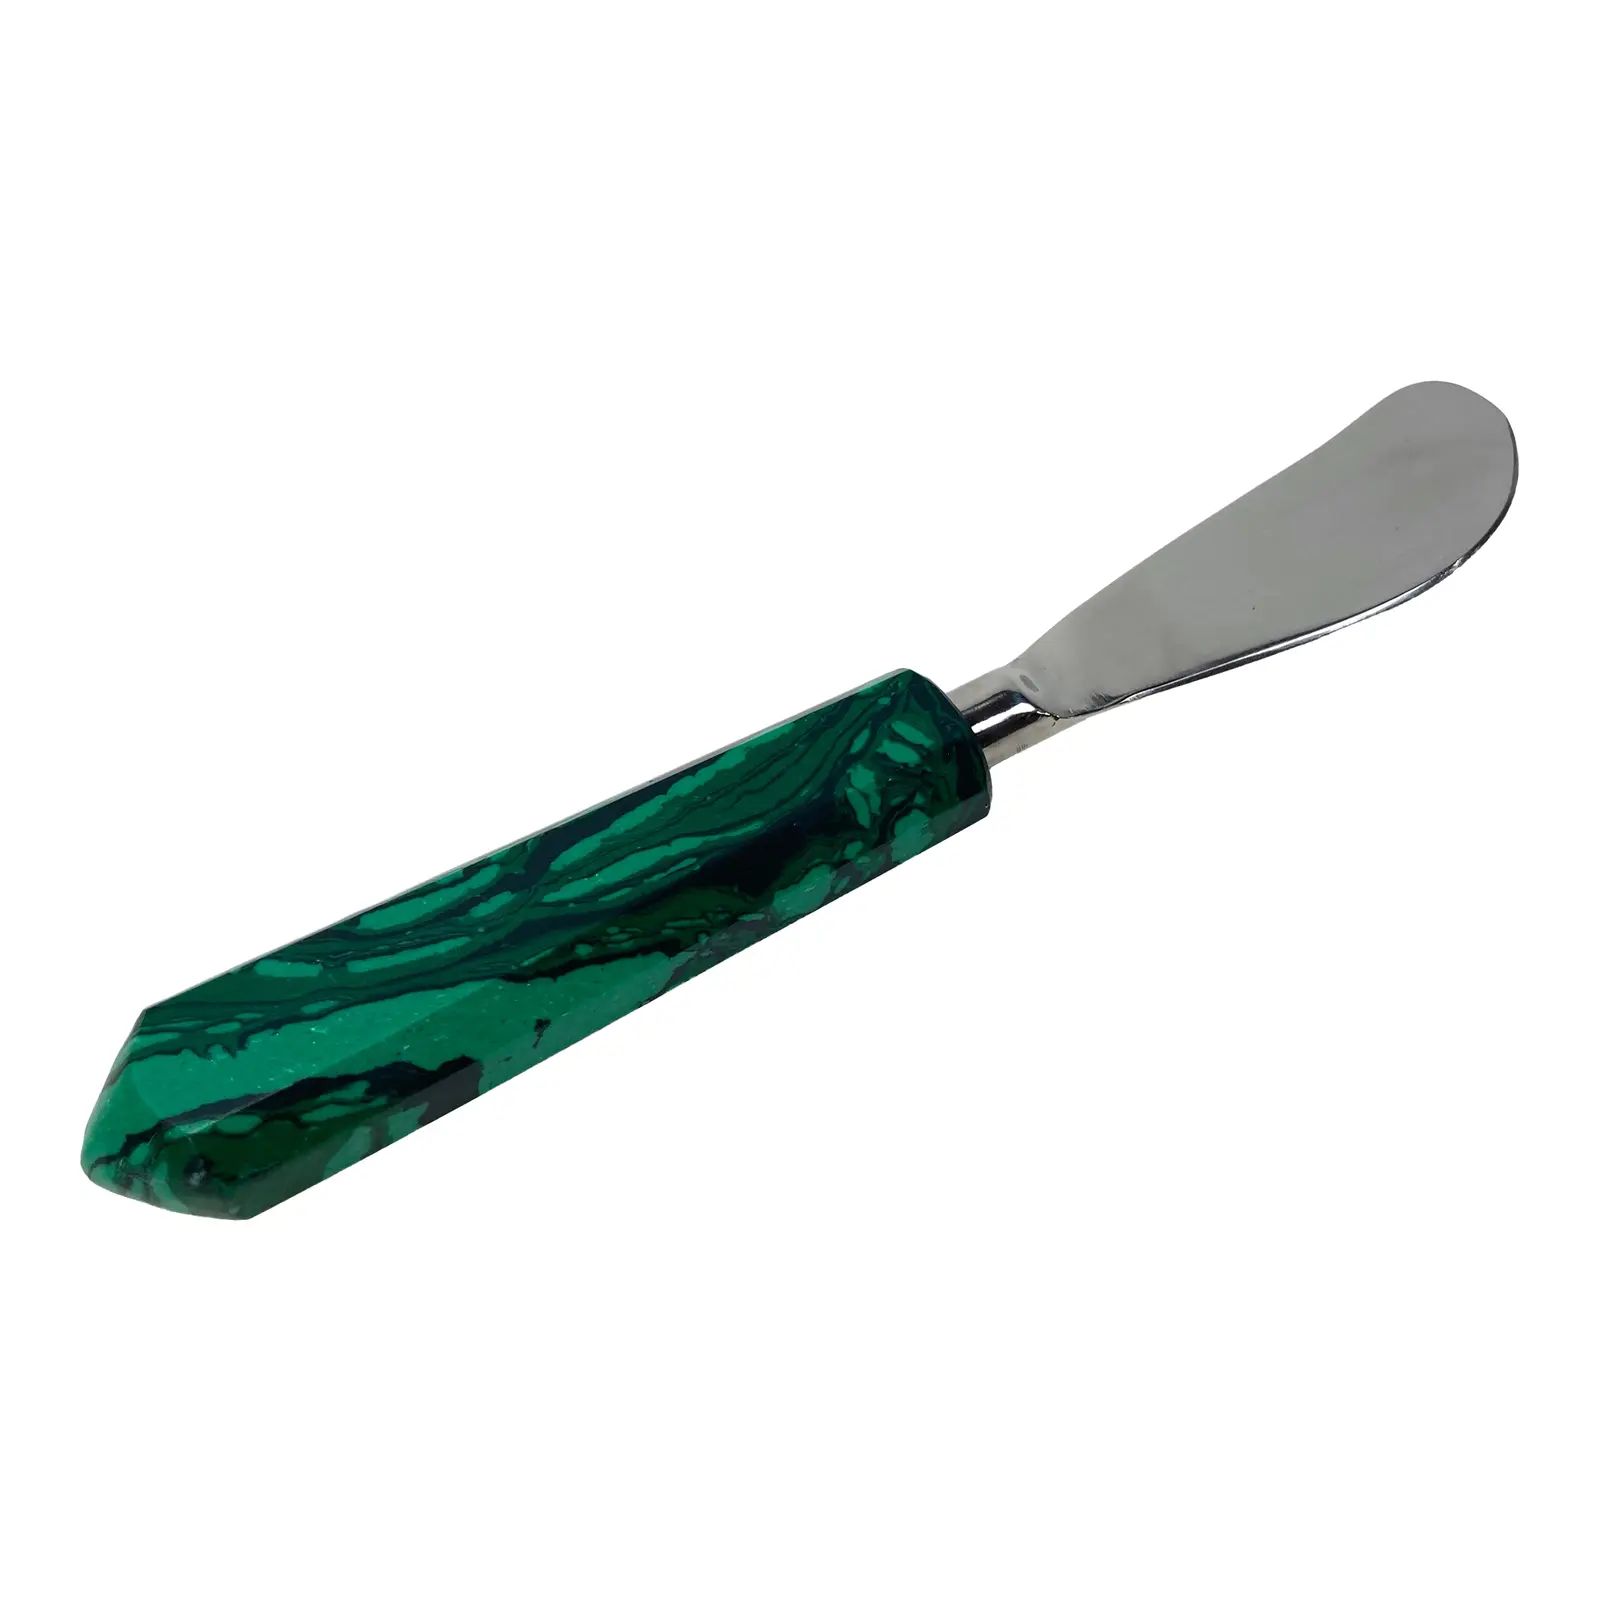 Faux Malachite Handled Hors D' Oeuvres Spreader | Chairish